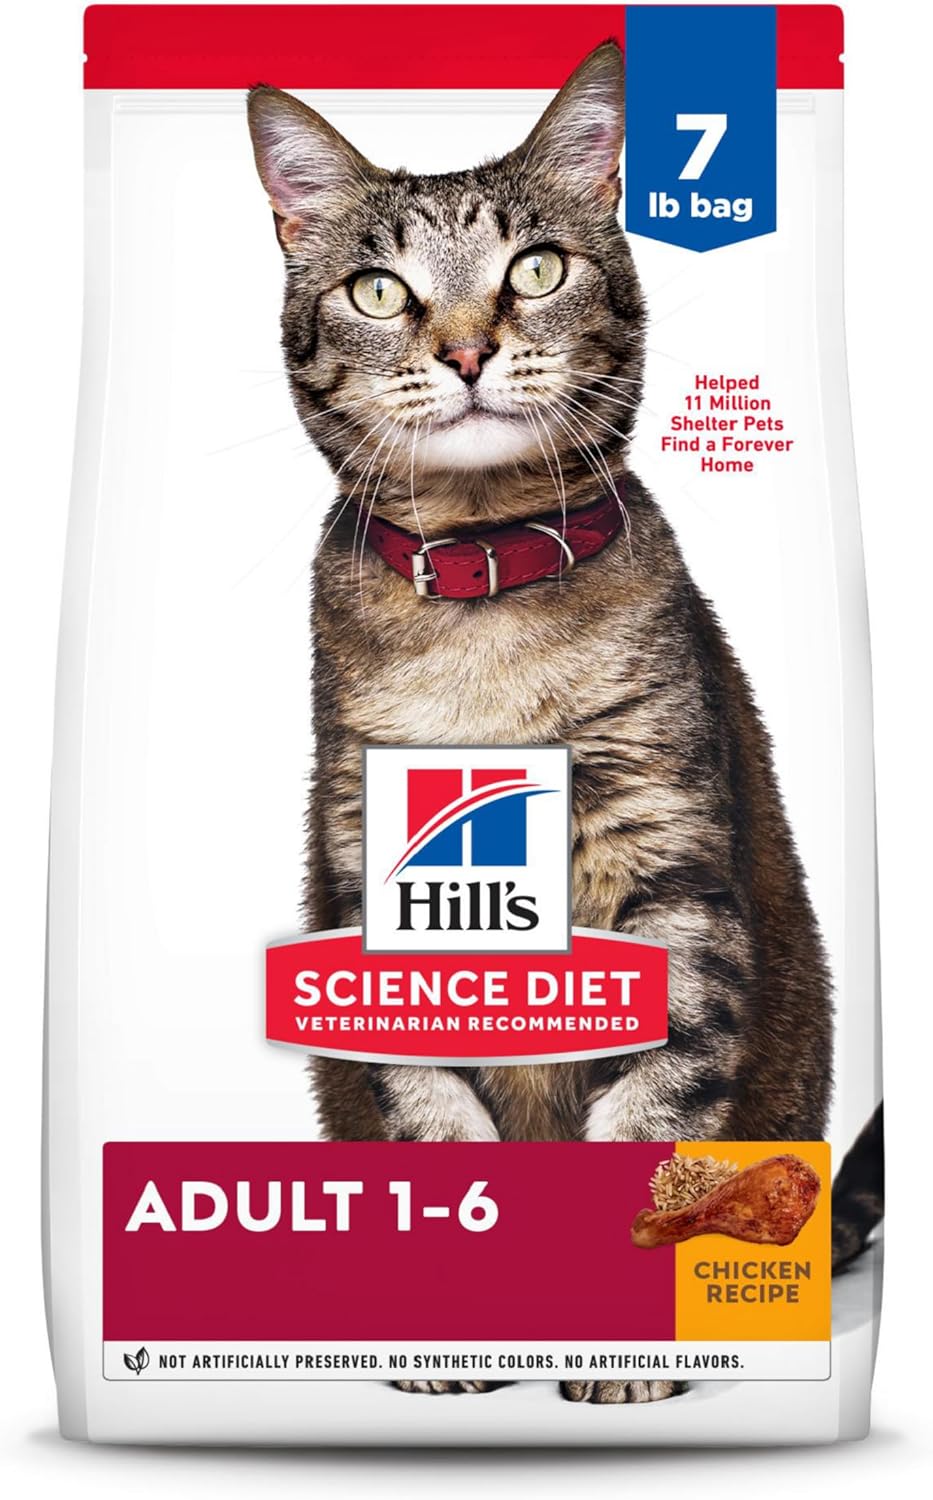 Hills Science Diet Adult Cat Food 1-7 years old-front of bag